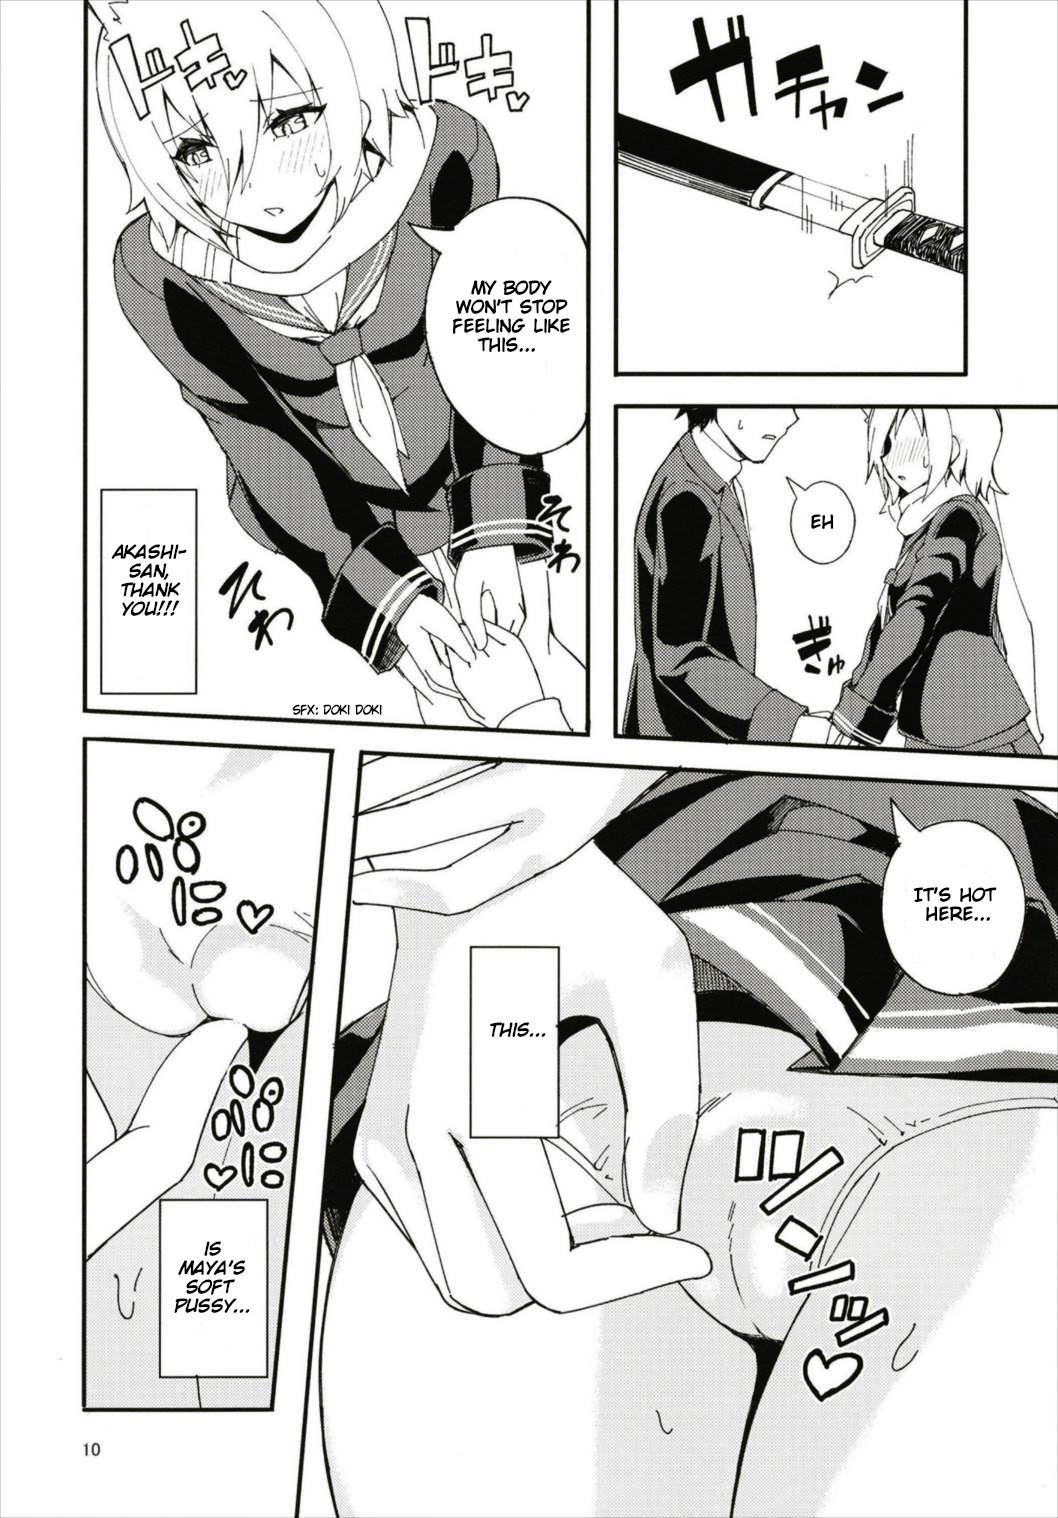 Phat Ass Hood and Maya's affection has risen too much. - Azur lane Maledom - Page 10